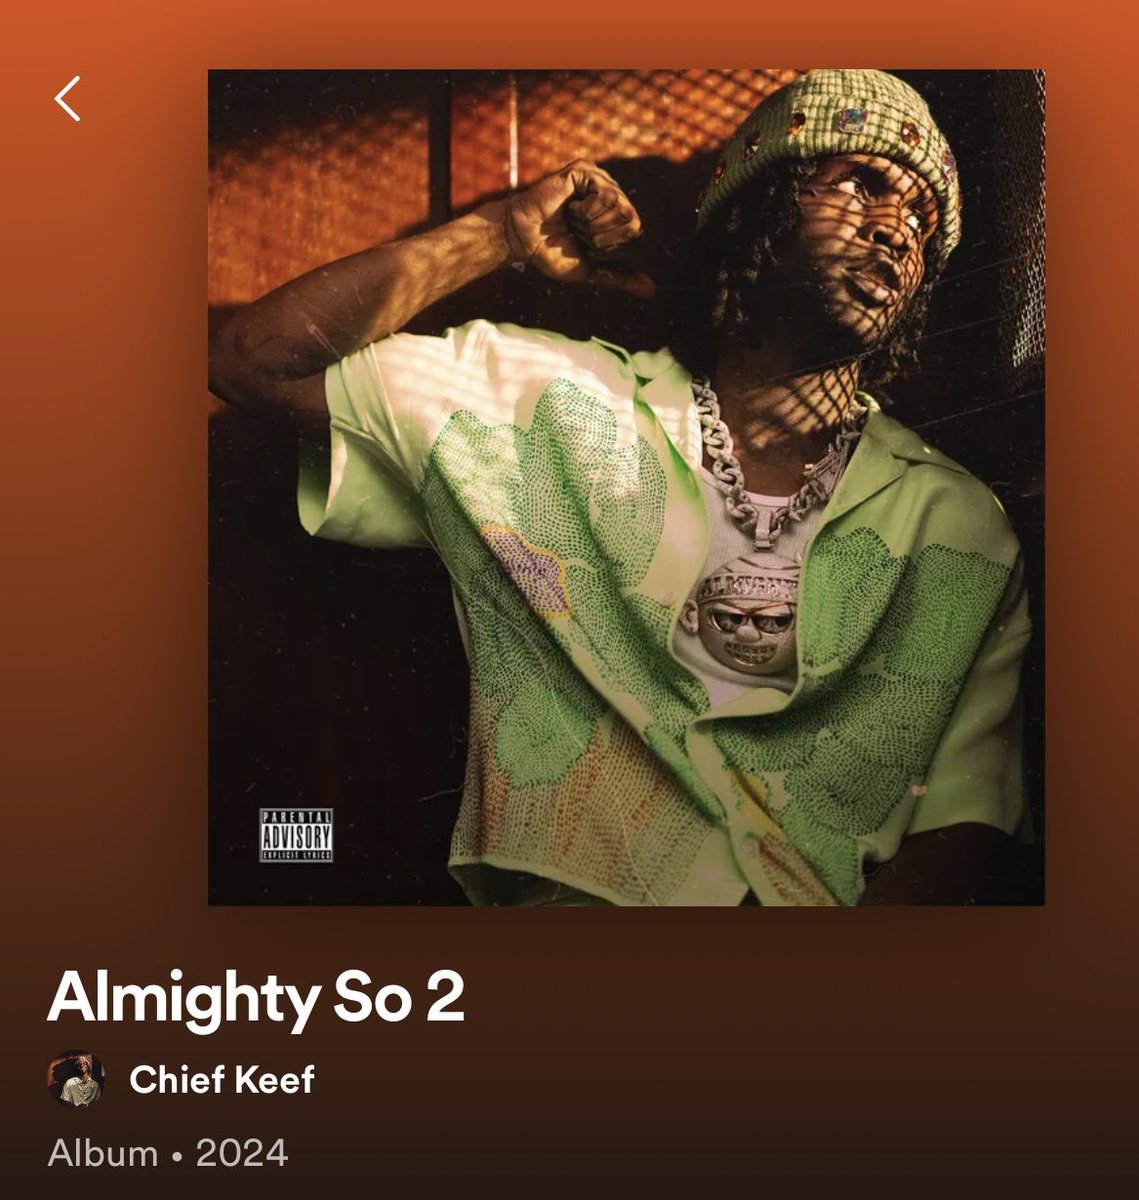 The beats on this new Chief Keef album SLAP 🔥. Almighty So 2. I didn’t realize he’s a producer. Treat Myself, 1,2,3 and Believe are my fav joints on there. #NewMusicFriday